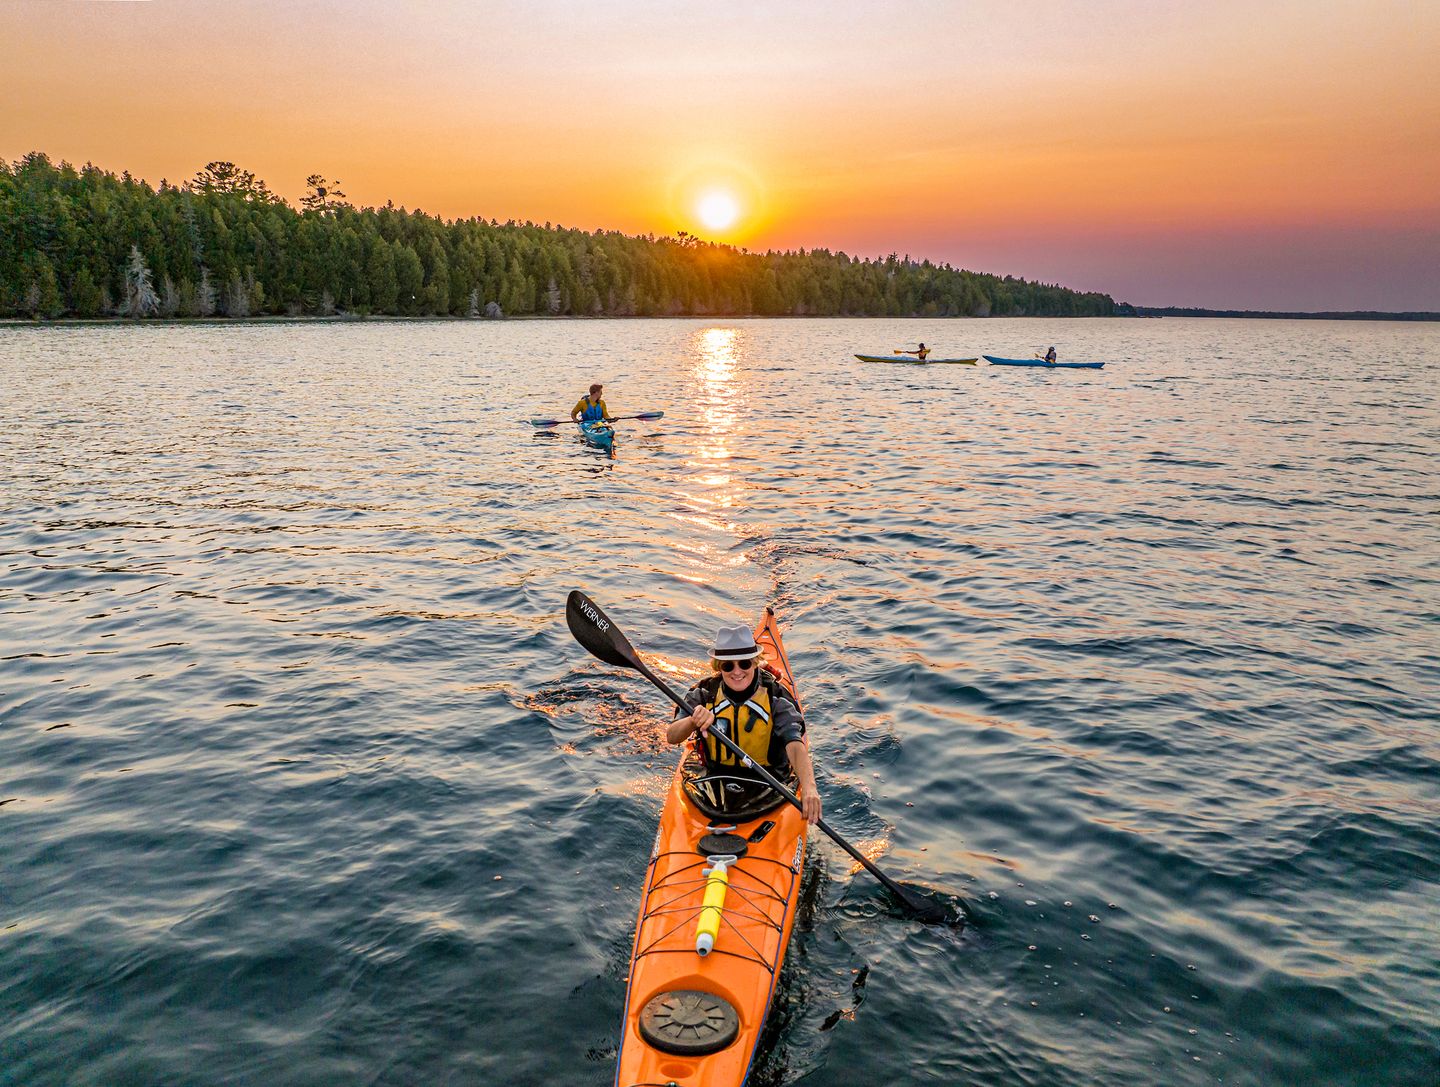 Several solo sea kayaks are paddling toward the camera on Wilderness Bay in Lake Huron's Les Cheneaux Islands while on a sunset kayak tour with Woods & Waters. The sun is setting behind an island.